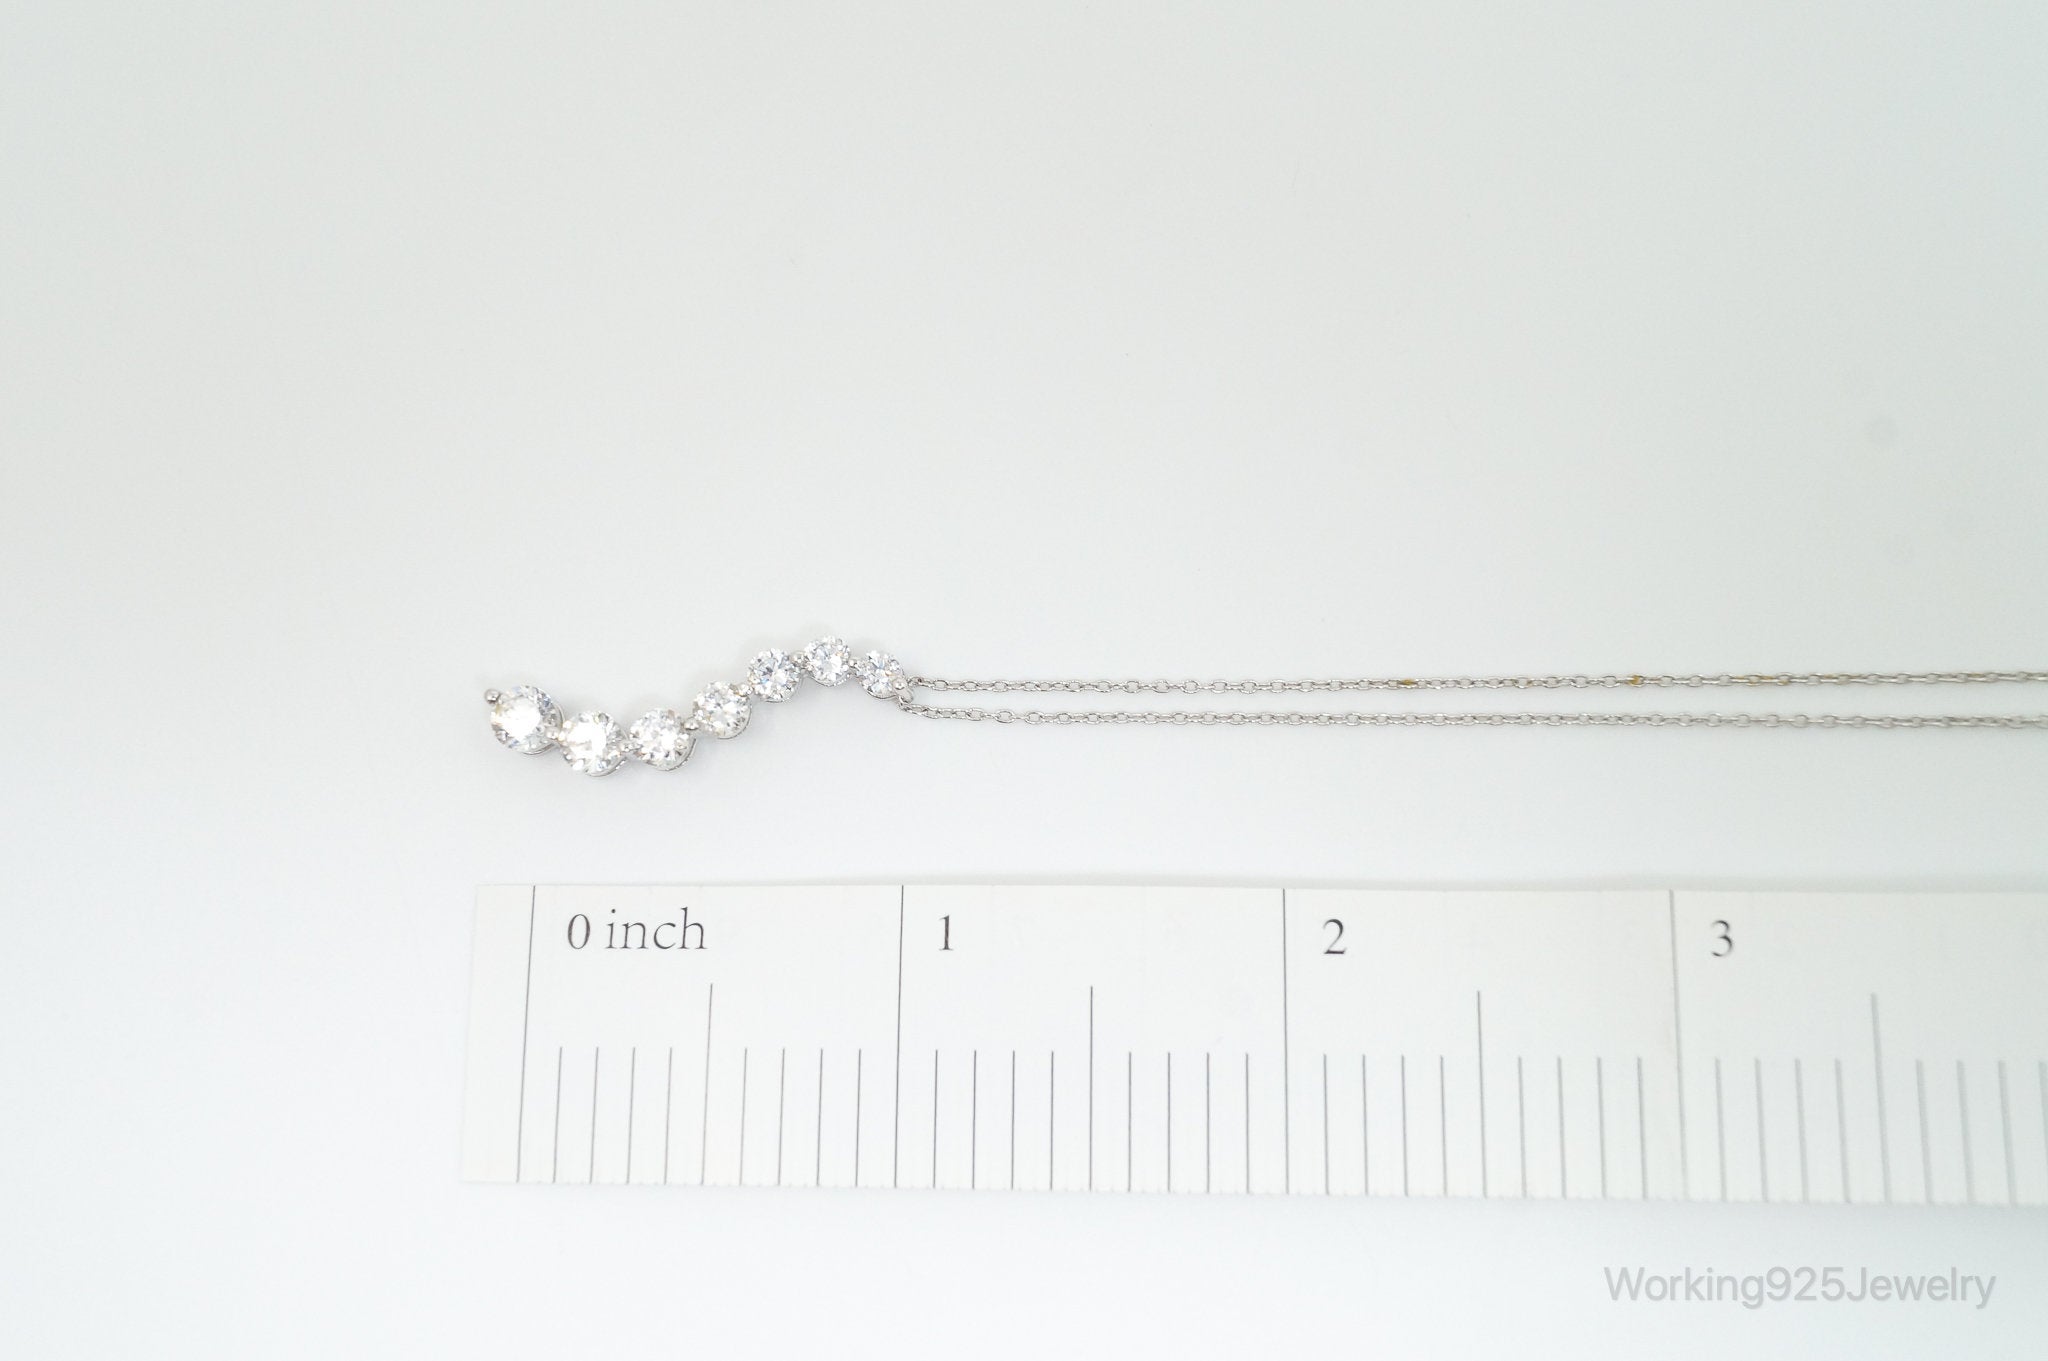 Vintage Cubic Zirconia Journey Necklace Sterling Silver - 18 Inch Chain